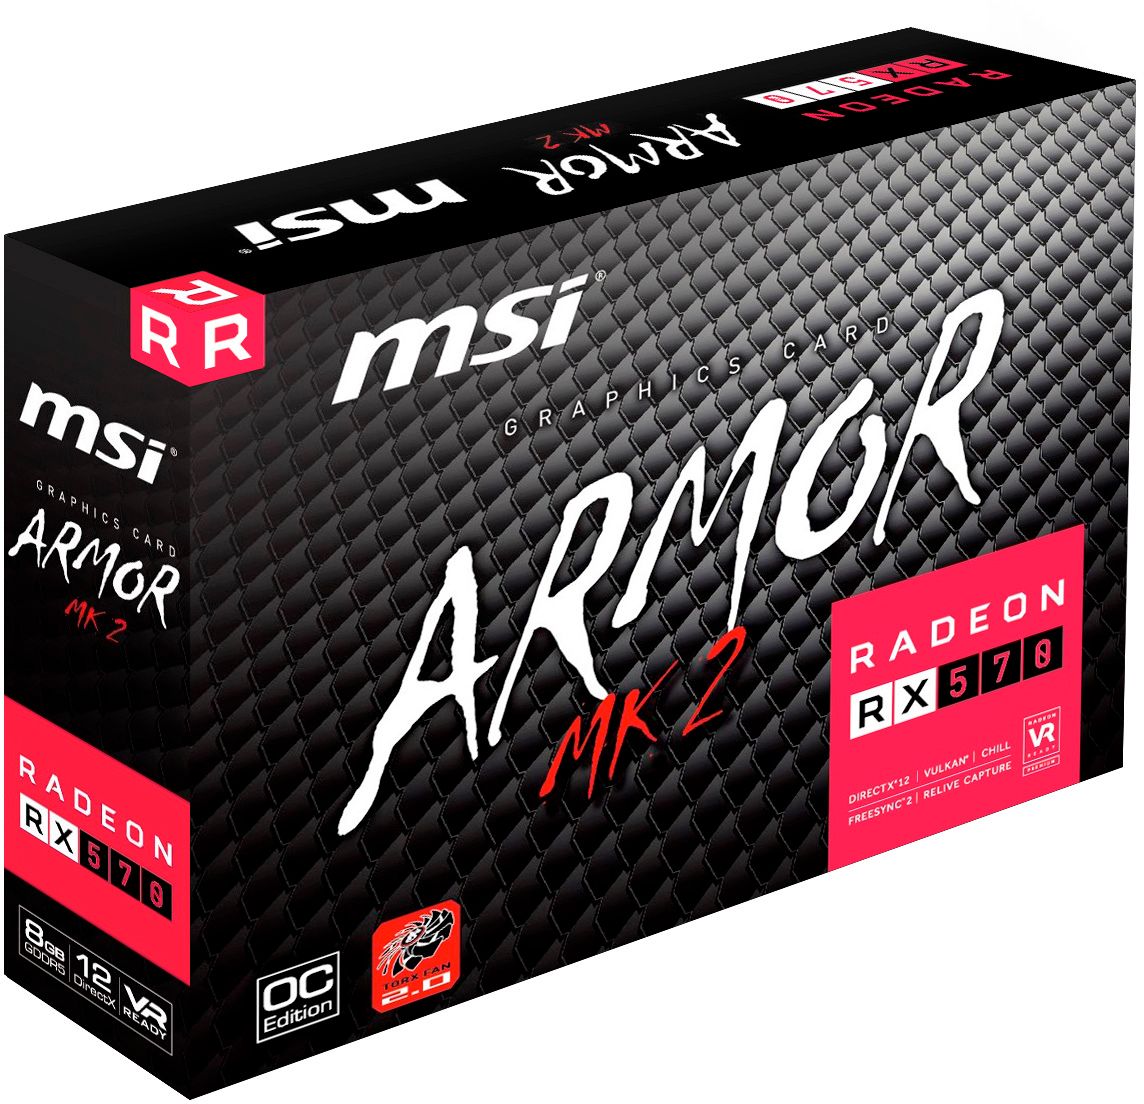 container Alert Just do Best Buy: MSI AMD Radeon RX 570 ARMOR OC 8G GDDR5 PCI Express 3.0 Graphics  Card Black/Red R570AR28C